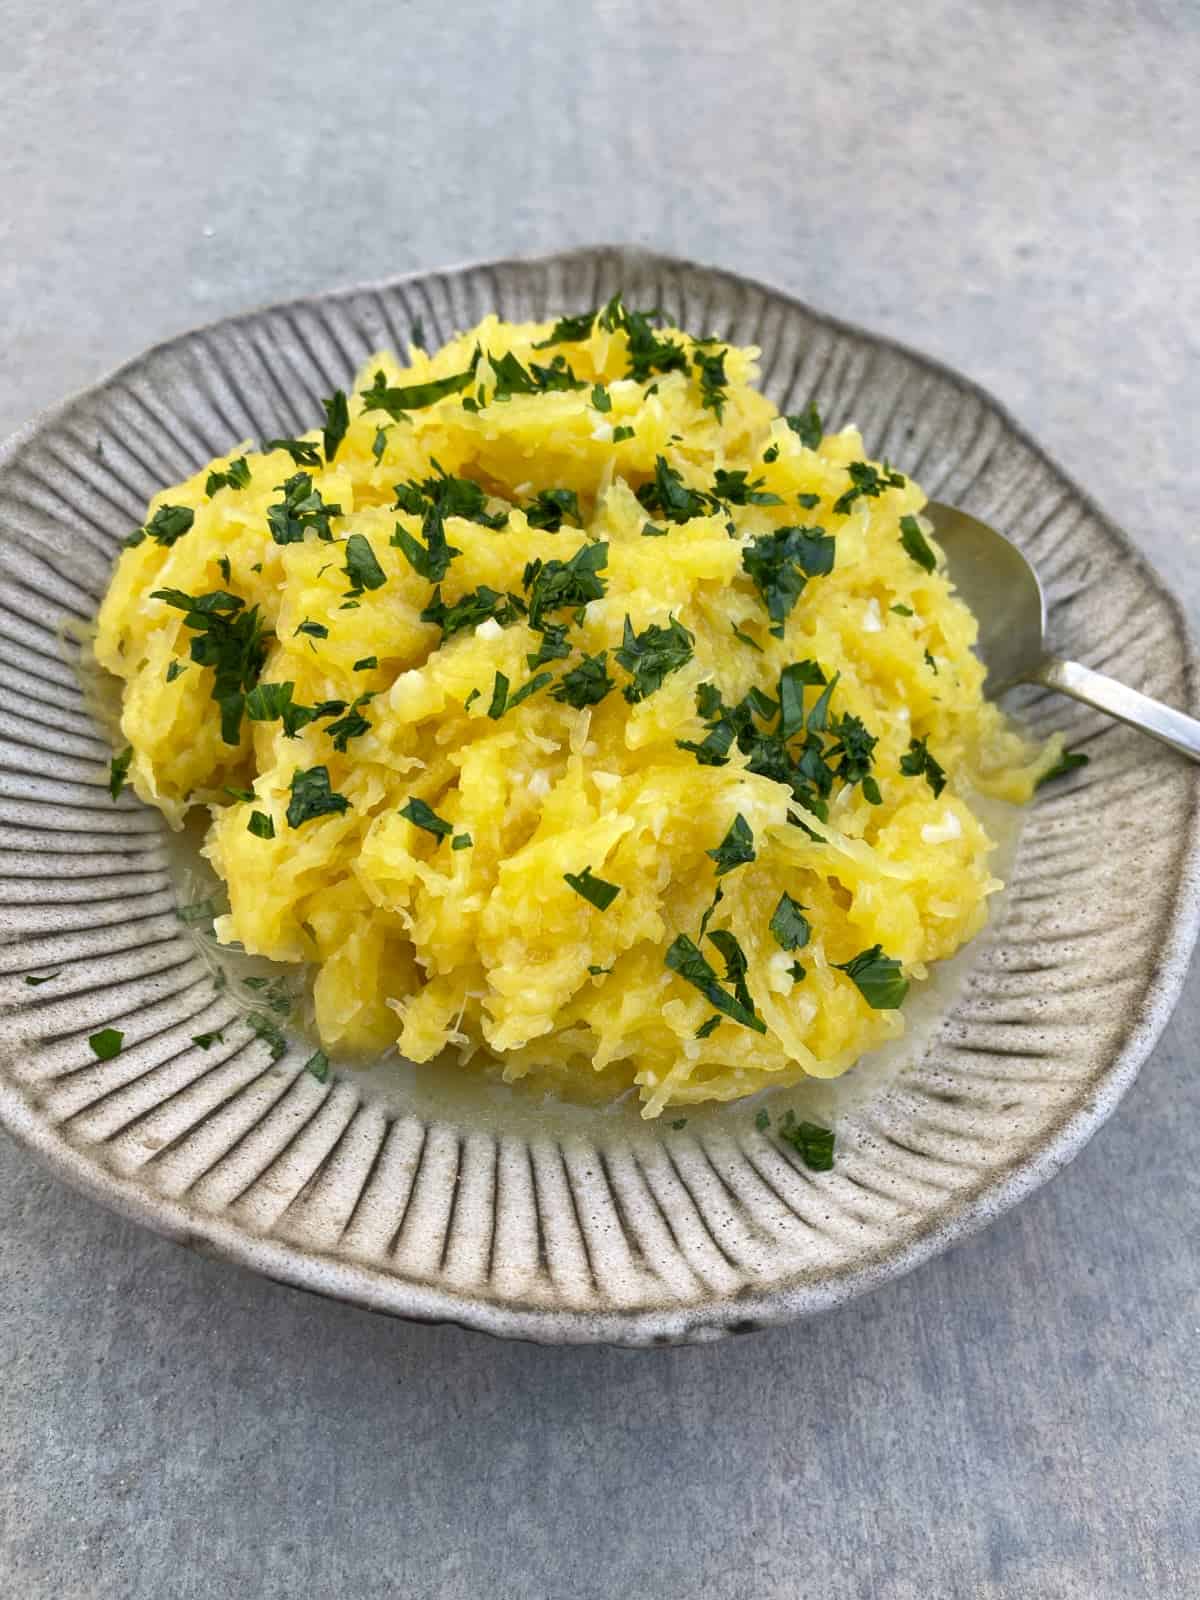 Instantpot Garlic Parmesan Spaghetti Squash topped with fresh parsley in ceramic serving bowl with spoon.